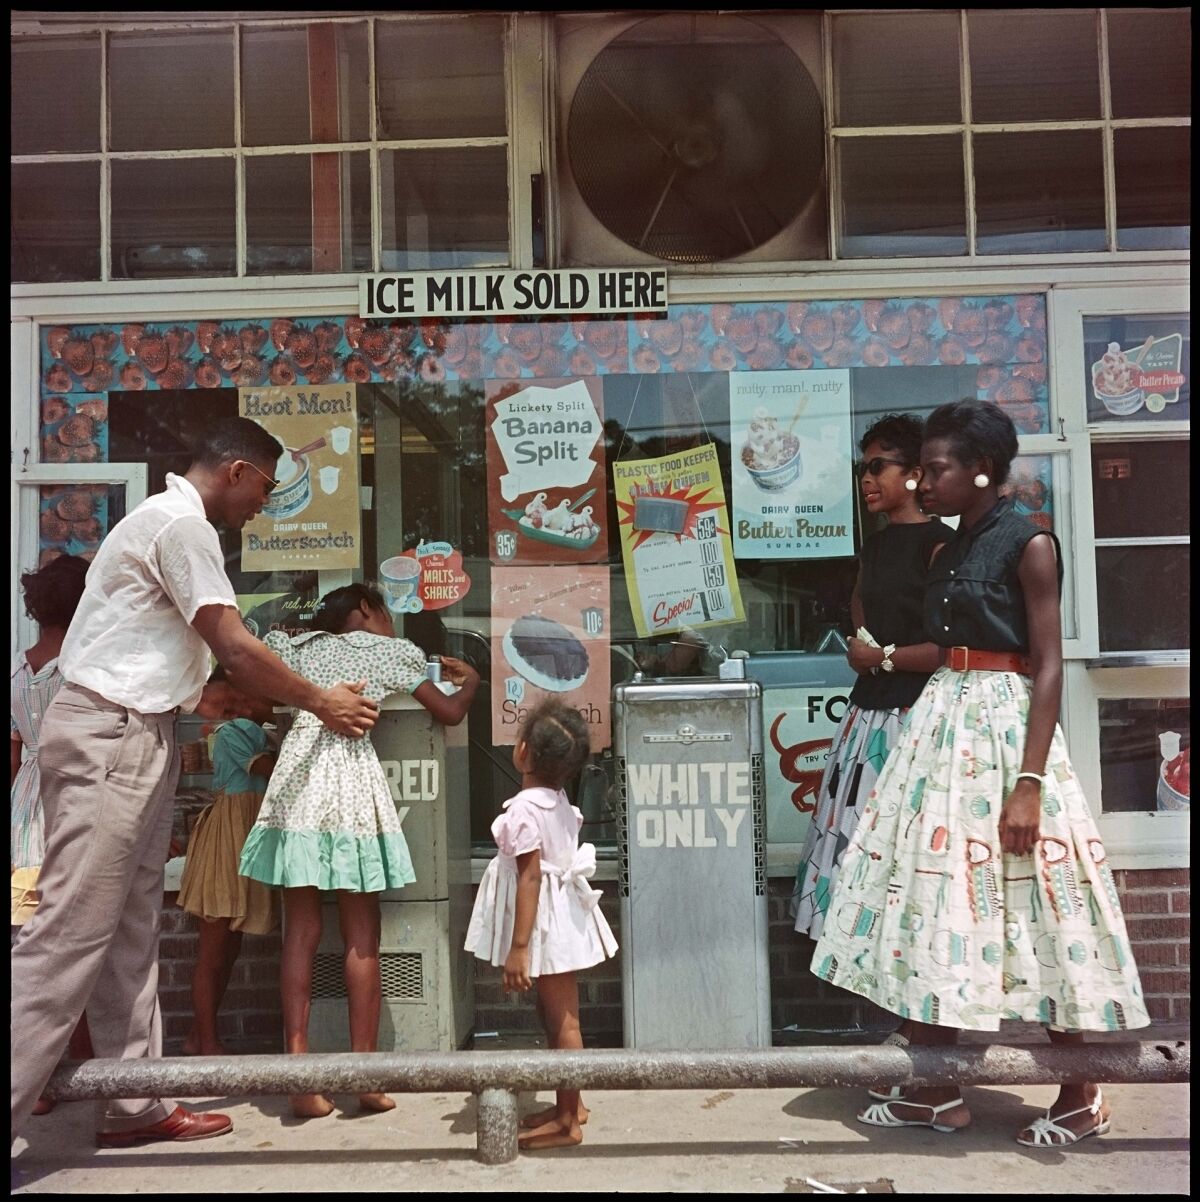 Gordon Park's 1956 photograph of a Black family at a segregated drinking fountain